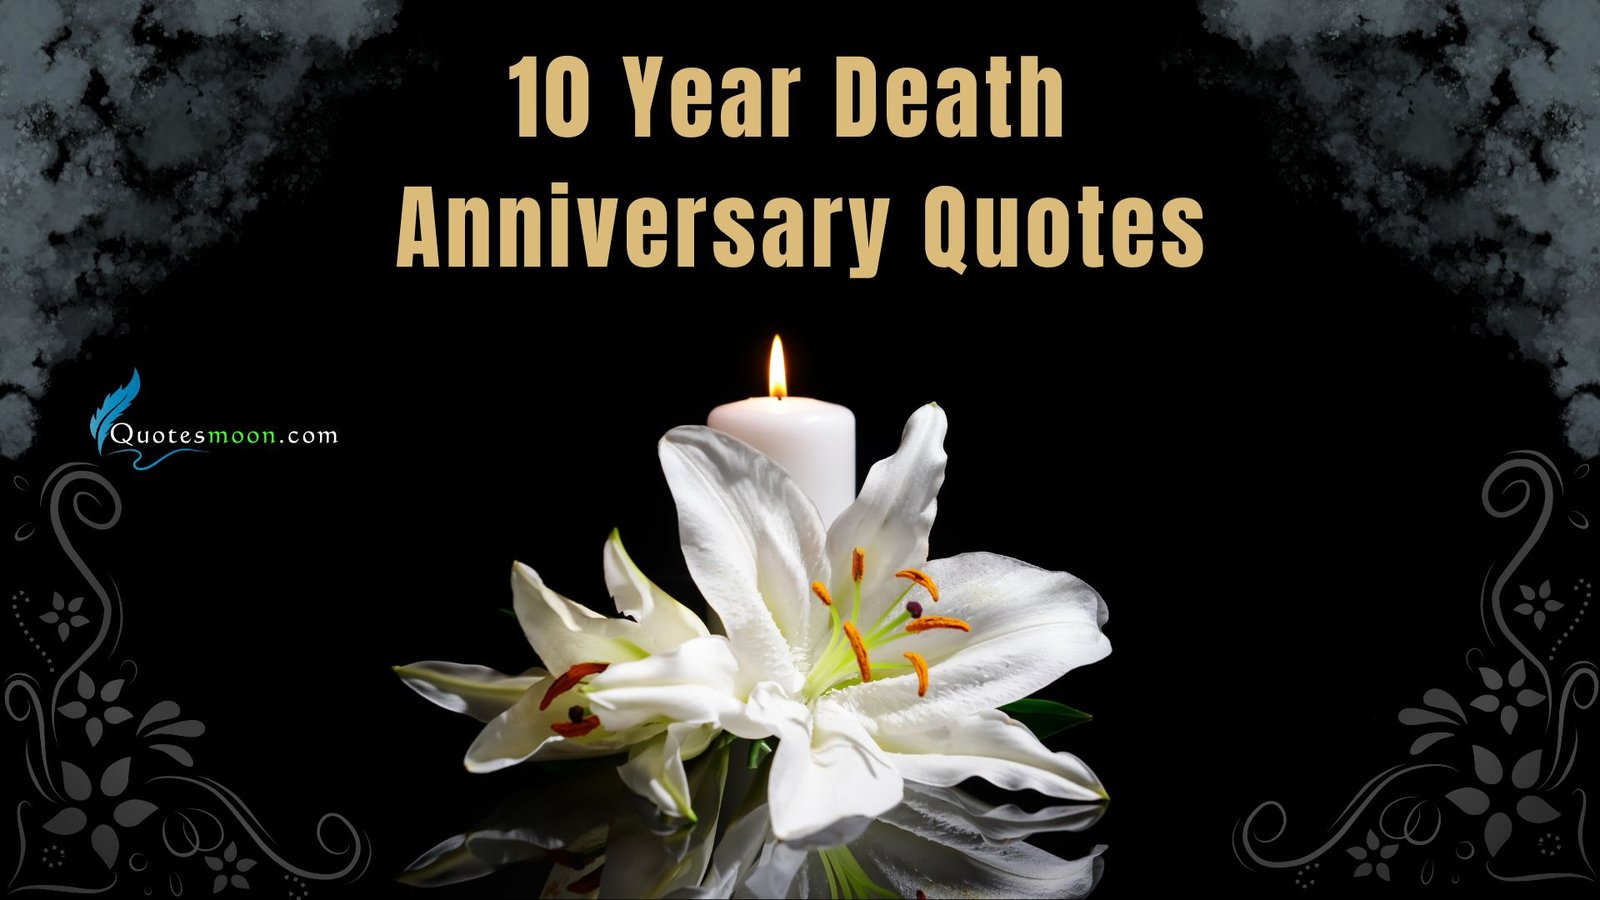 10 year death anniversary quotes